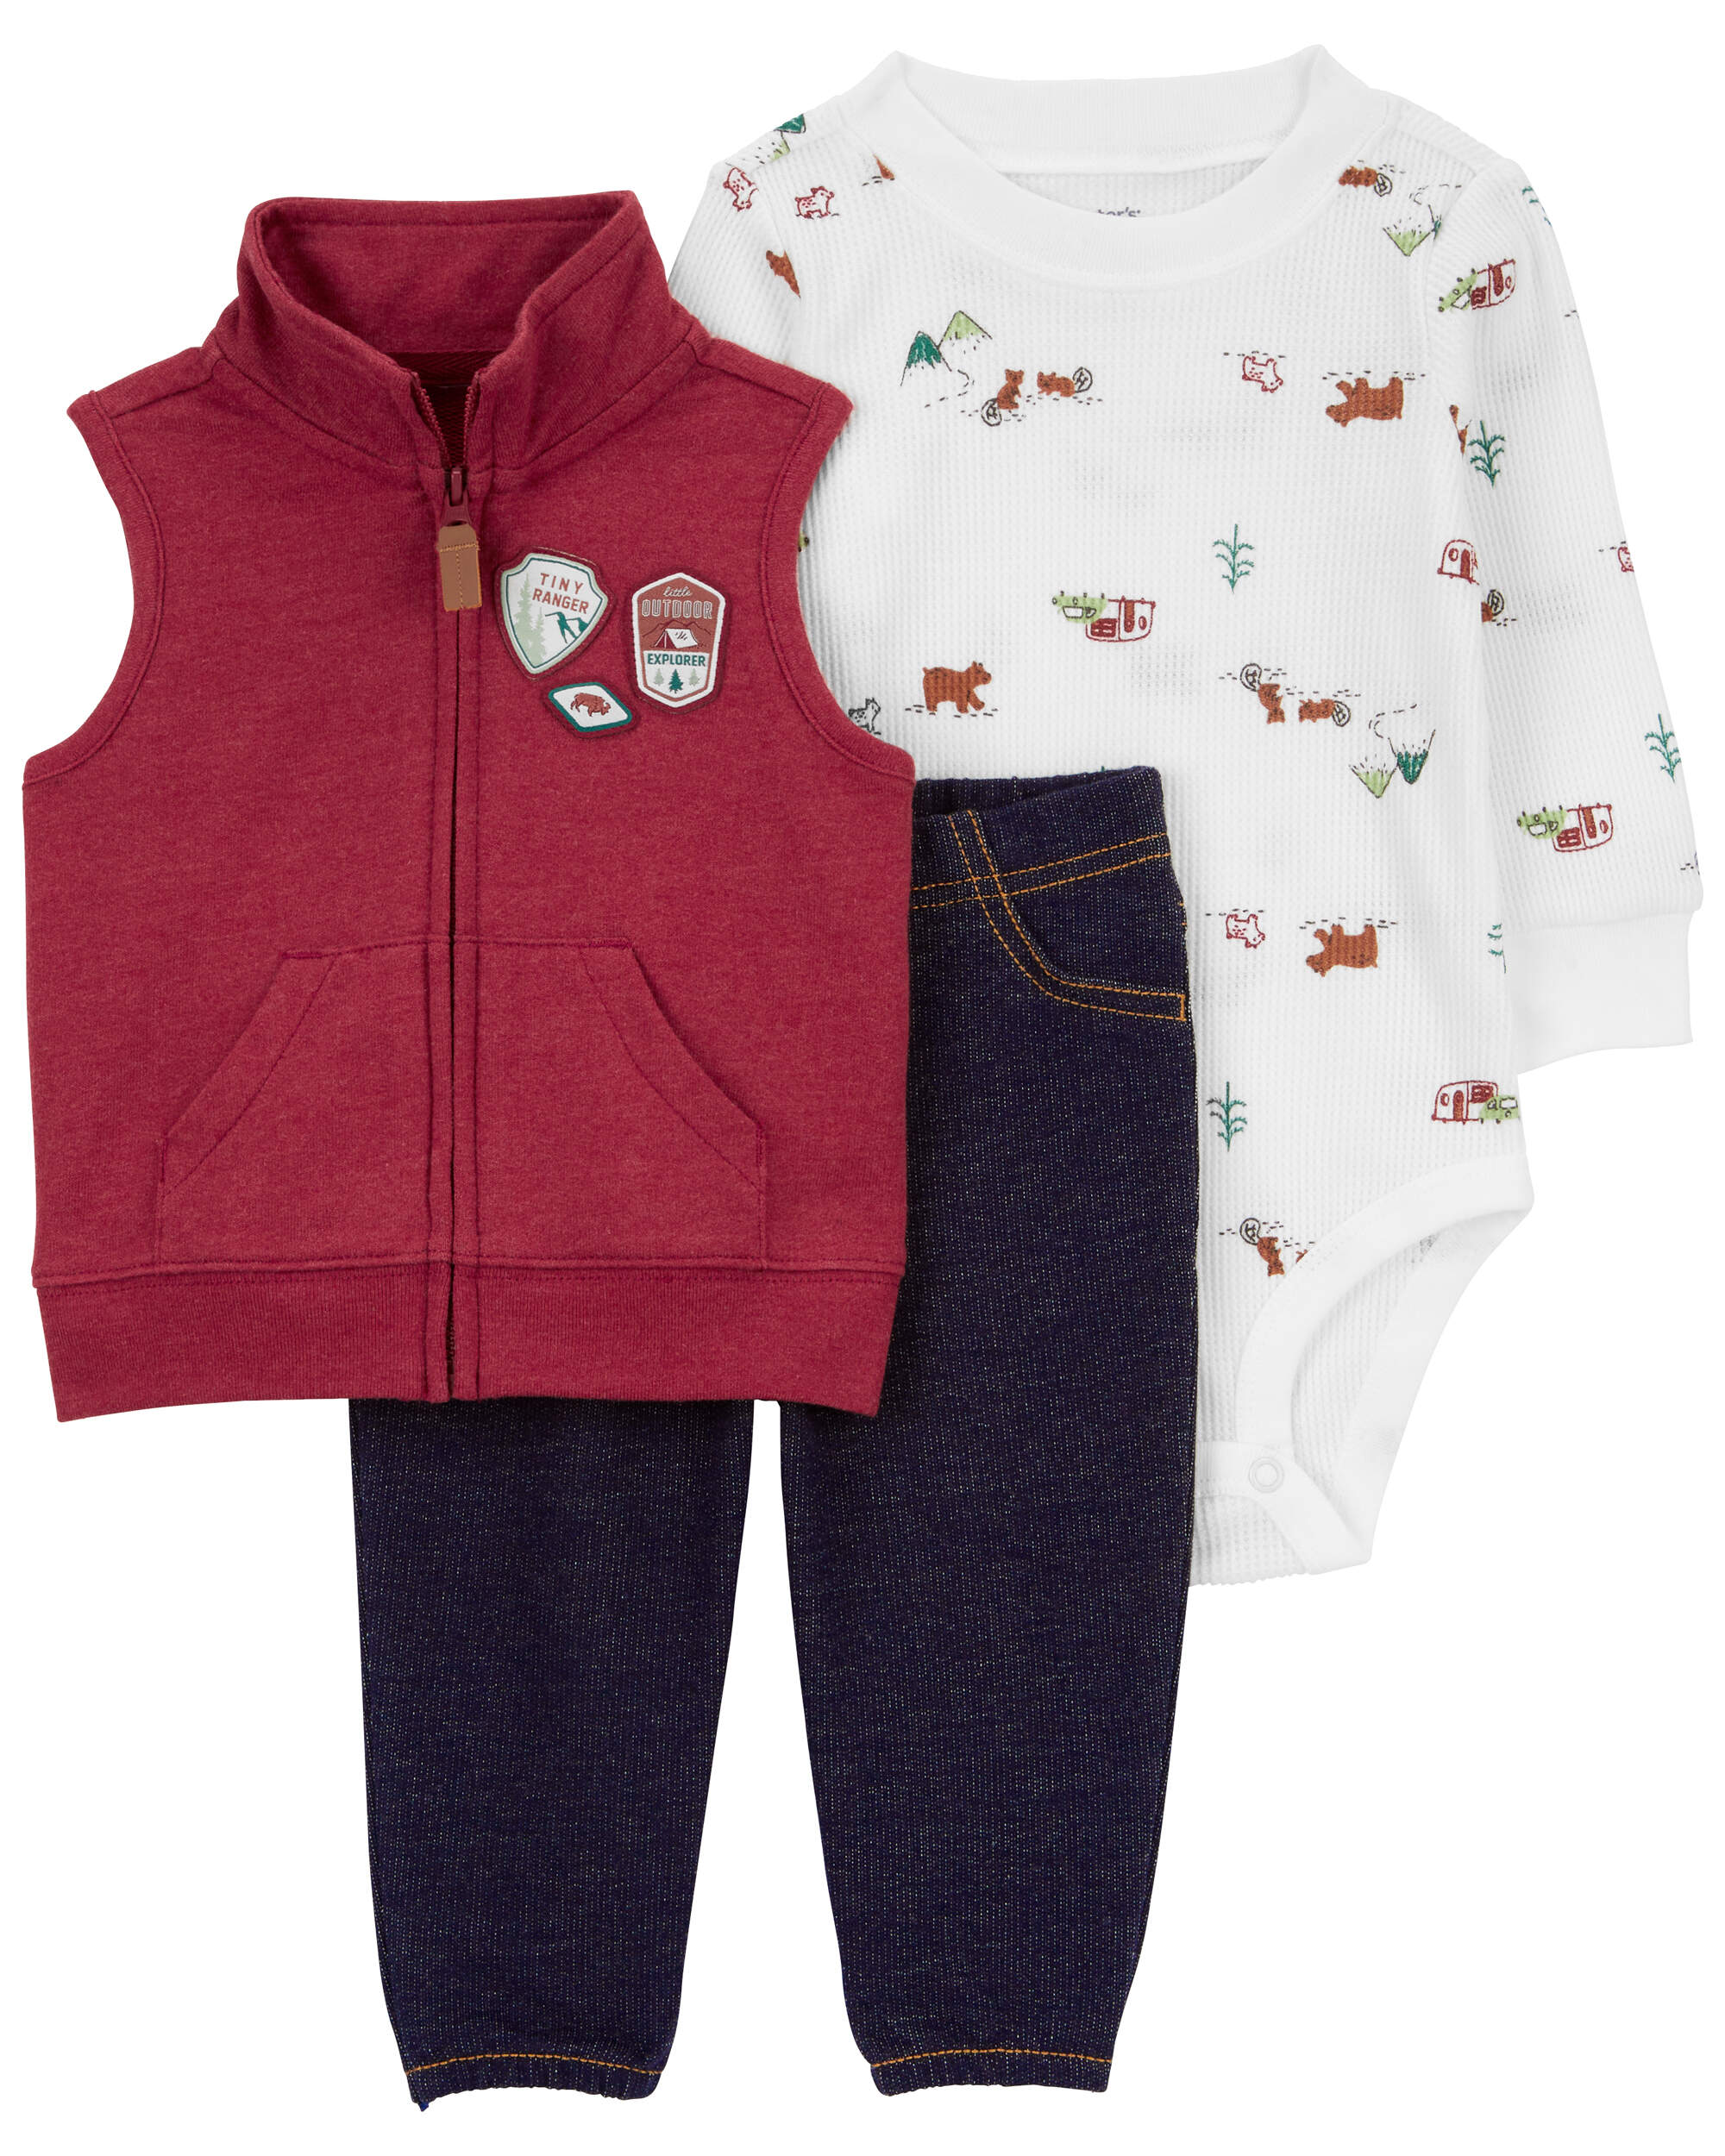 Baby 3-Piece Camping Ranger Little Vest Outfit Set